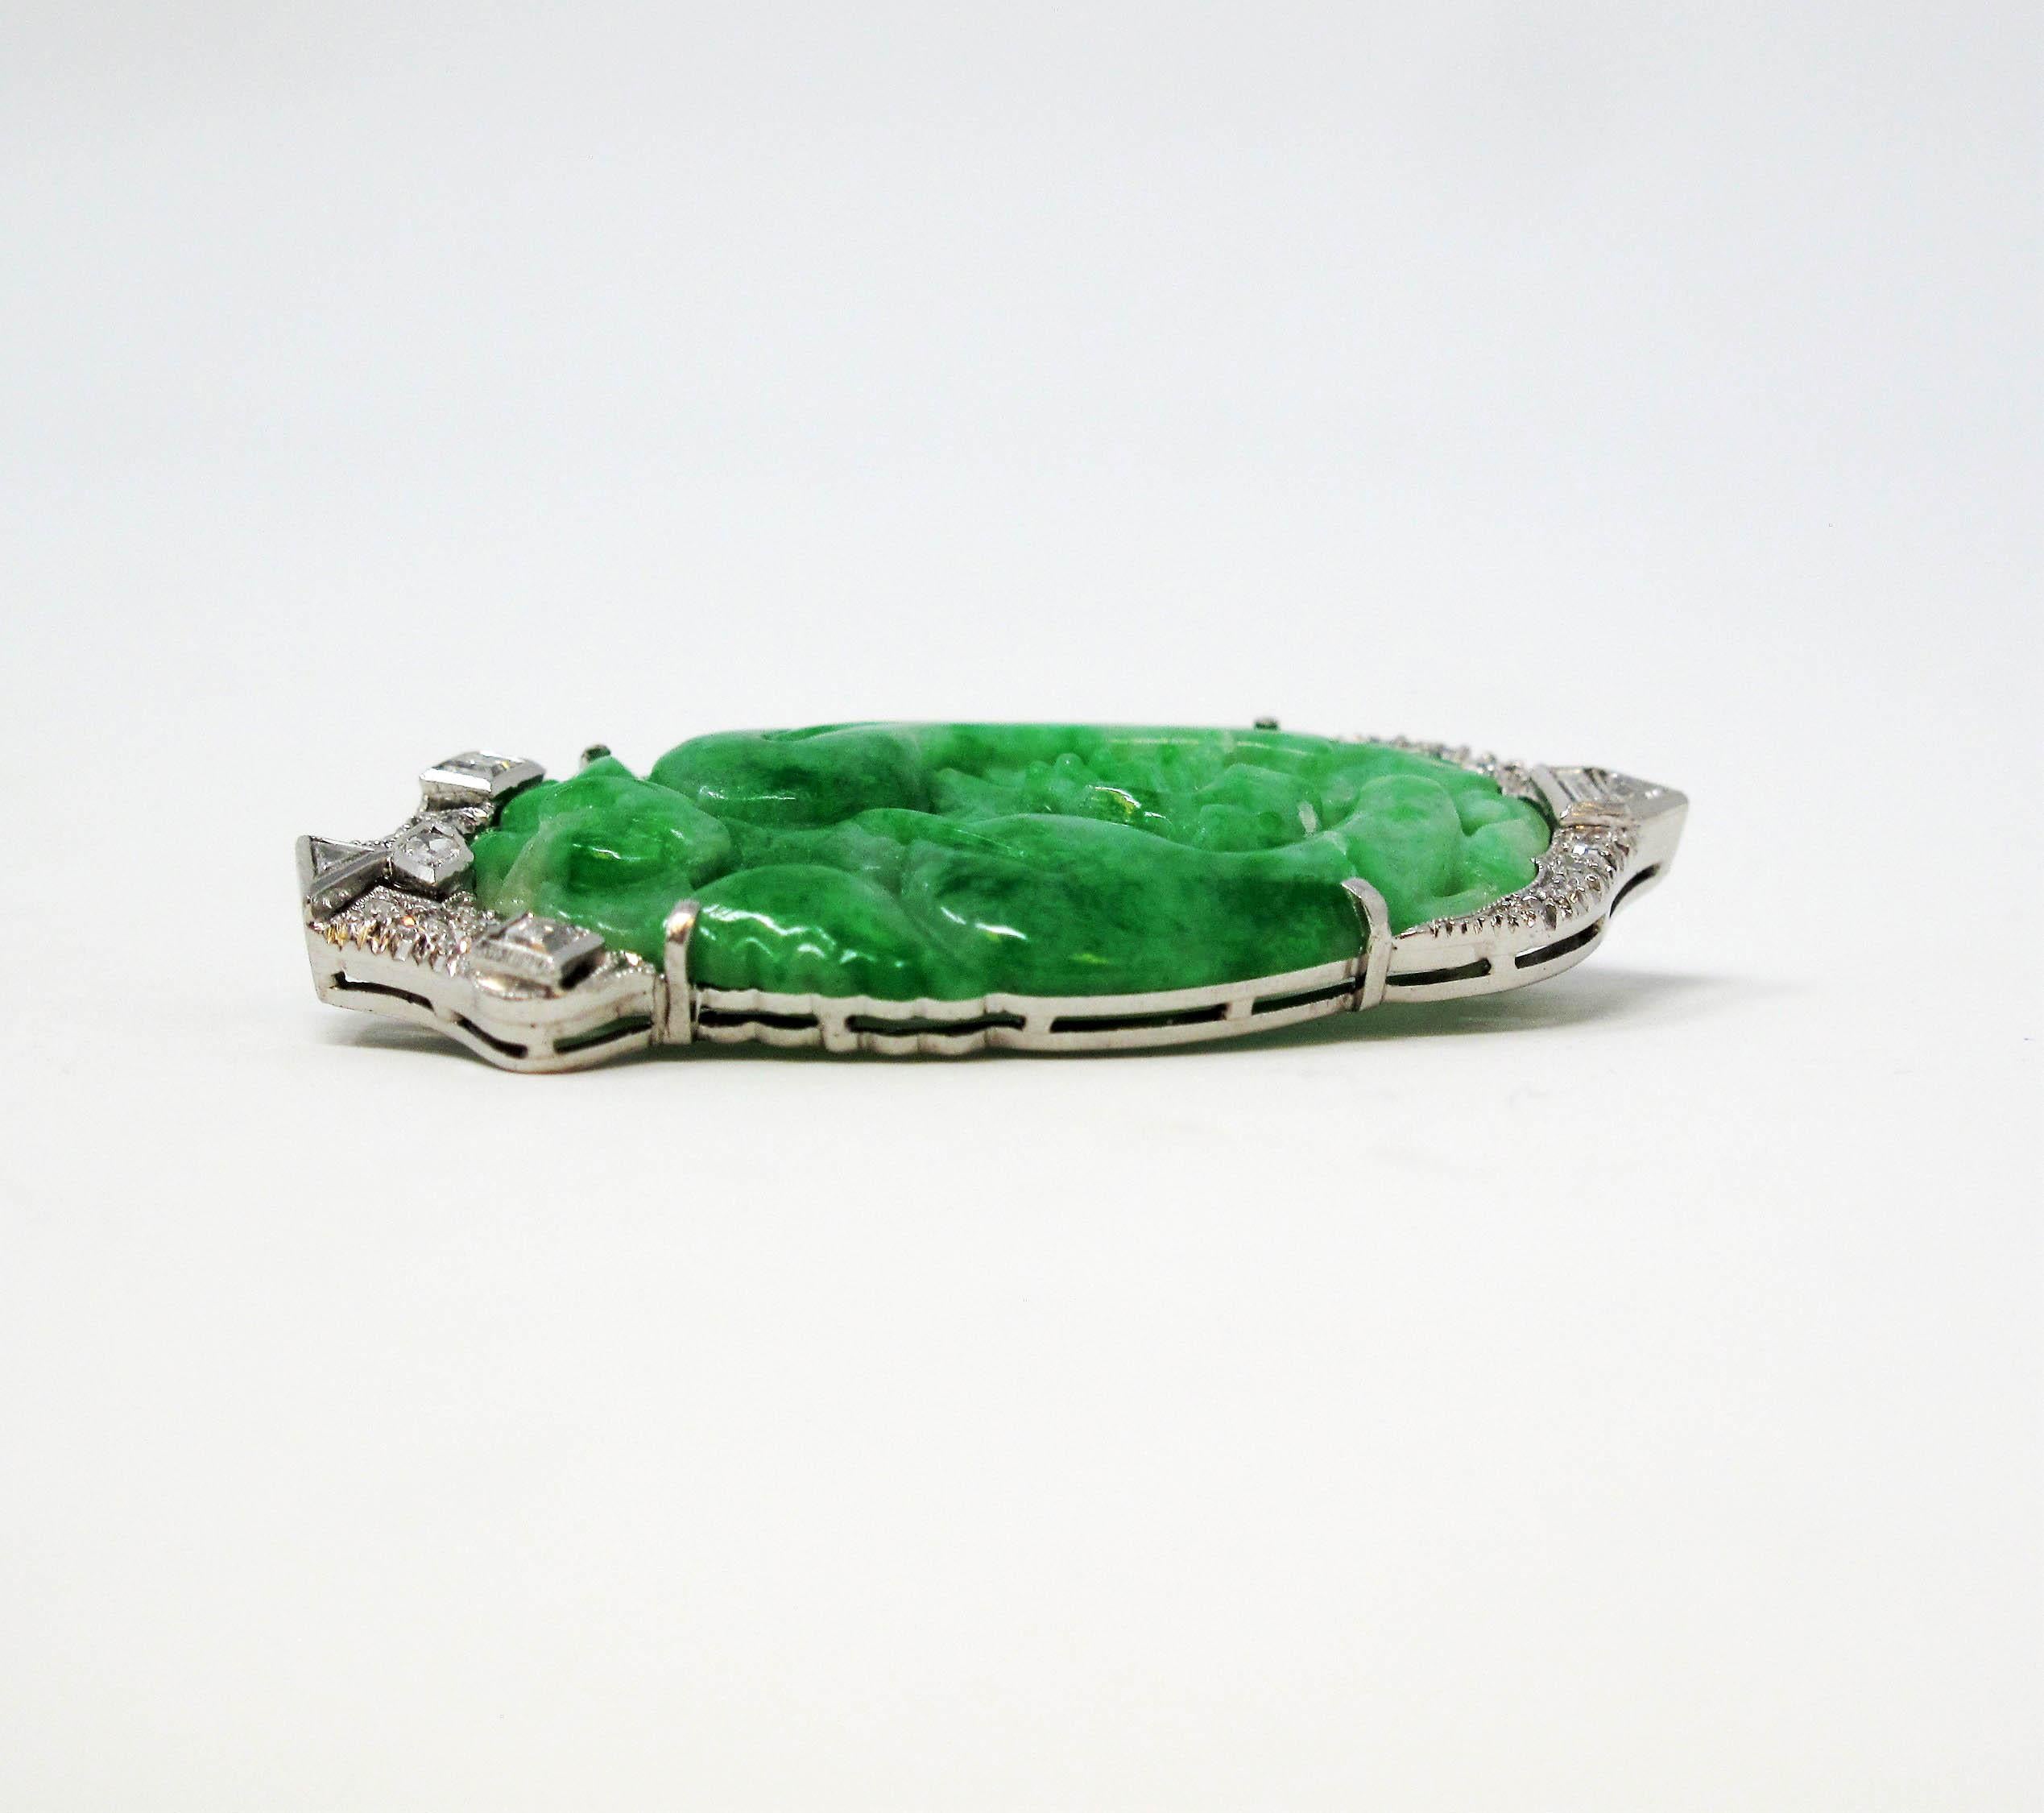 Absolutely gorgeous vintage jadeite and diamond brooch. This wearable piece of art is filled with vivid color, intricate design and incredible attention to detail. Add it anywhere you need a touch of vintage glamour. 

This lovely brooch features a